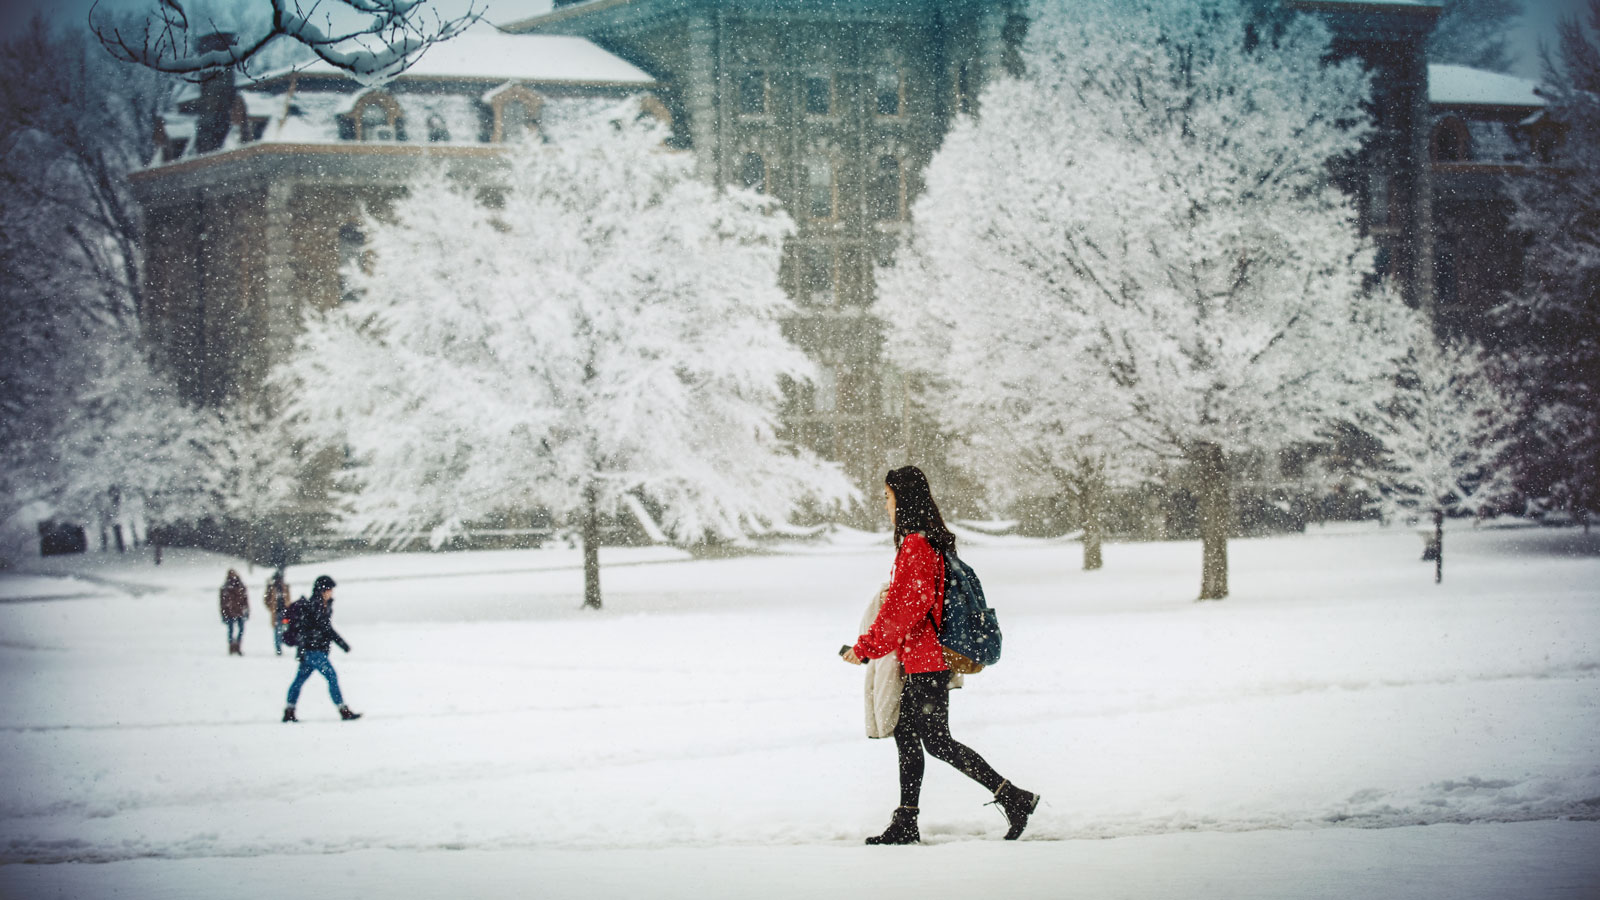 A student adds a pop of Cornell red to the Arts Quad during a winter snowfall